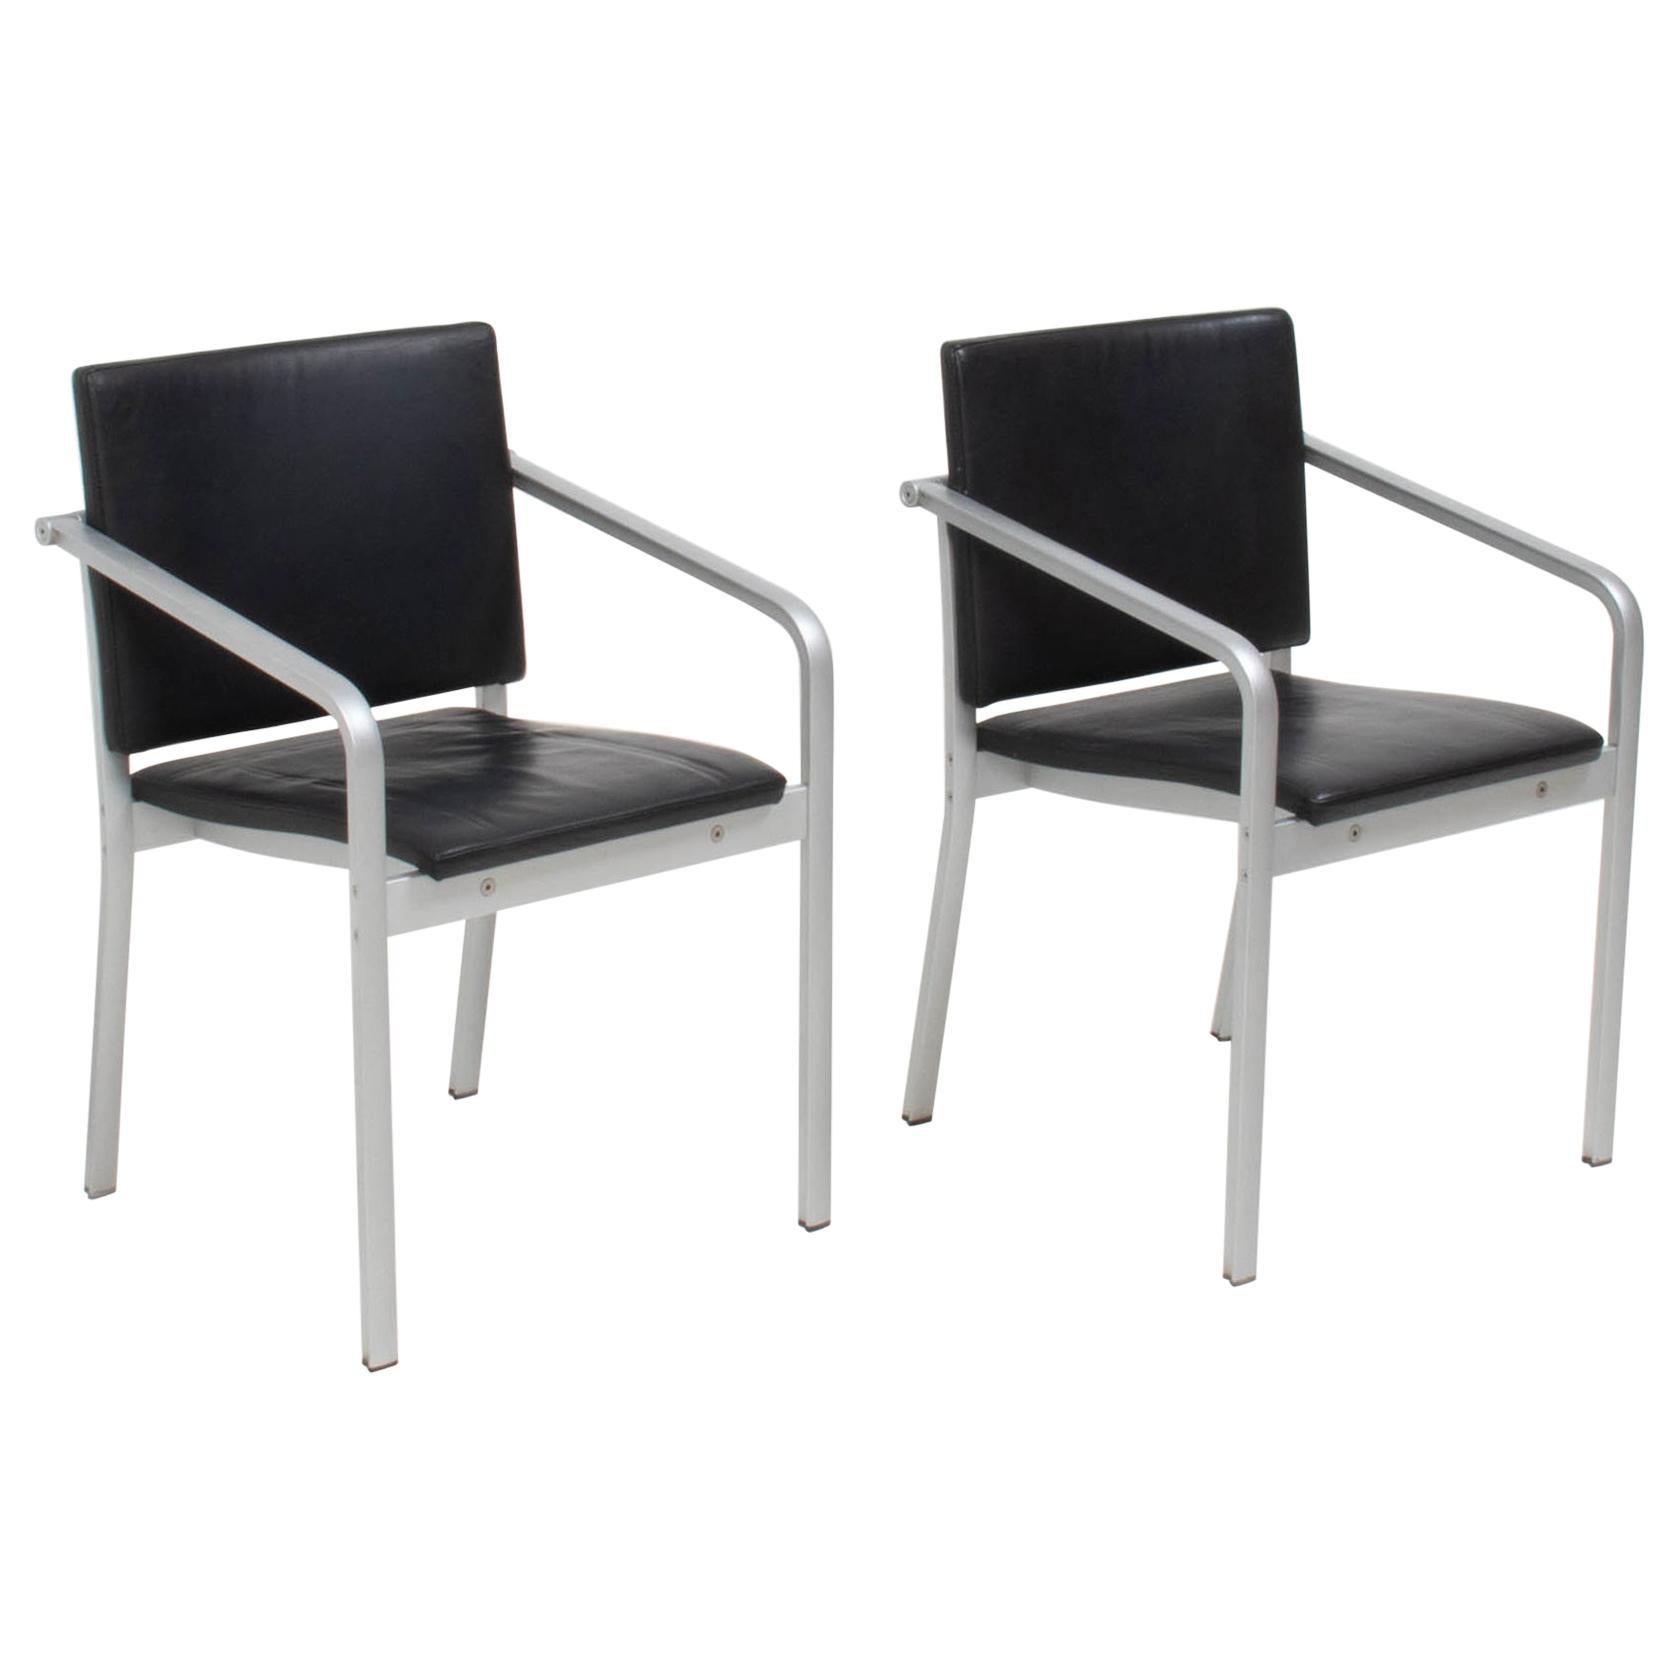 Thonet by Norman Foster A901 PF Aluminium and Black Leather Dining Chairs, Pair